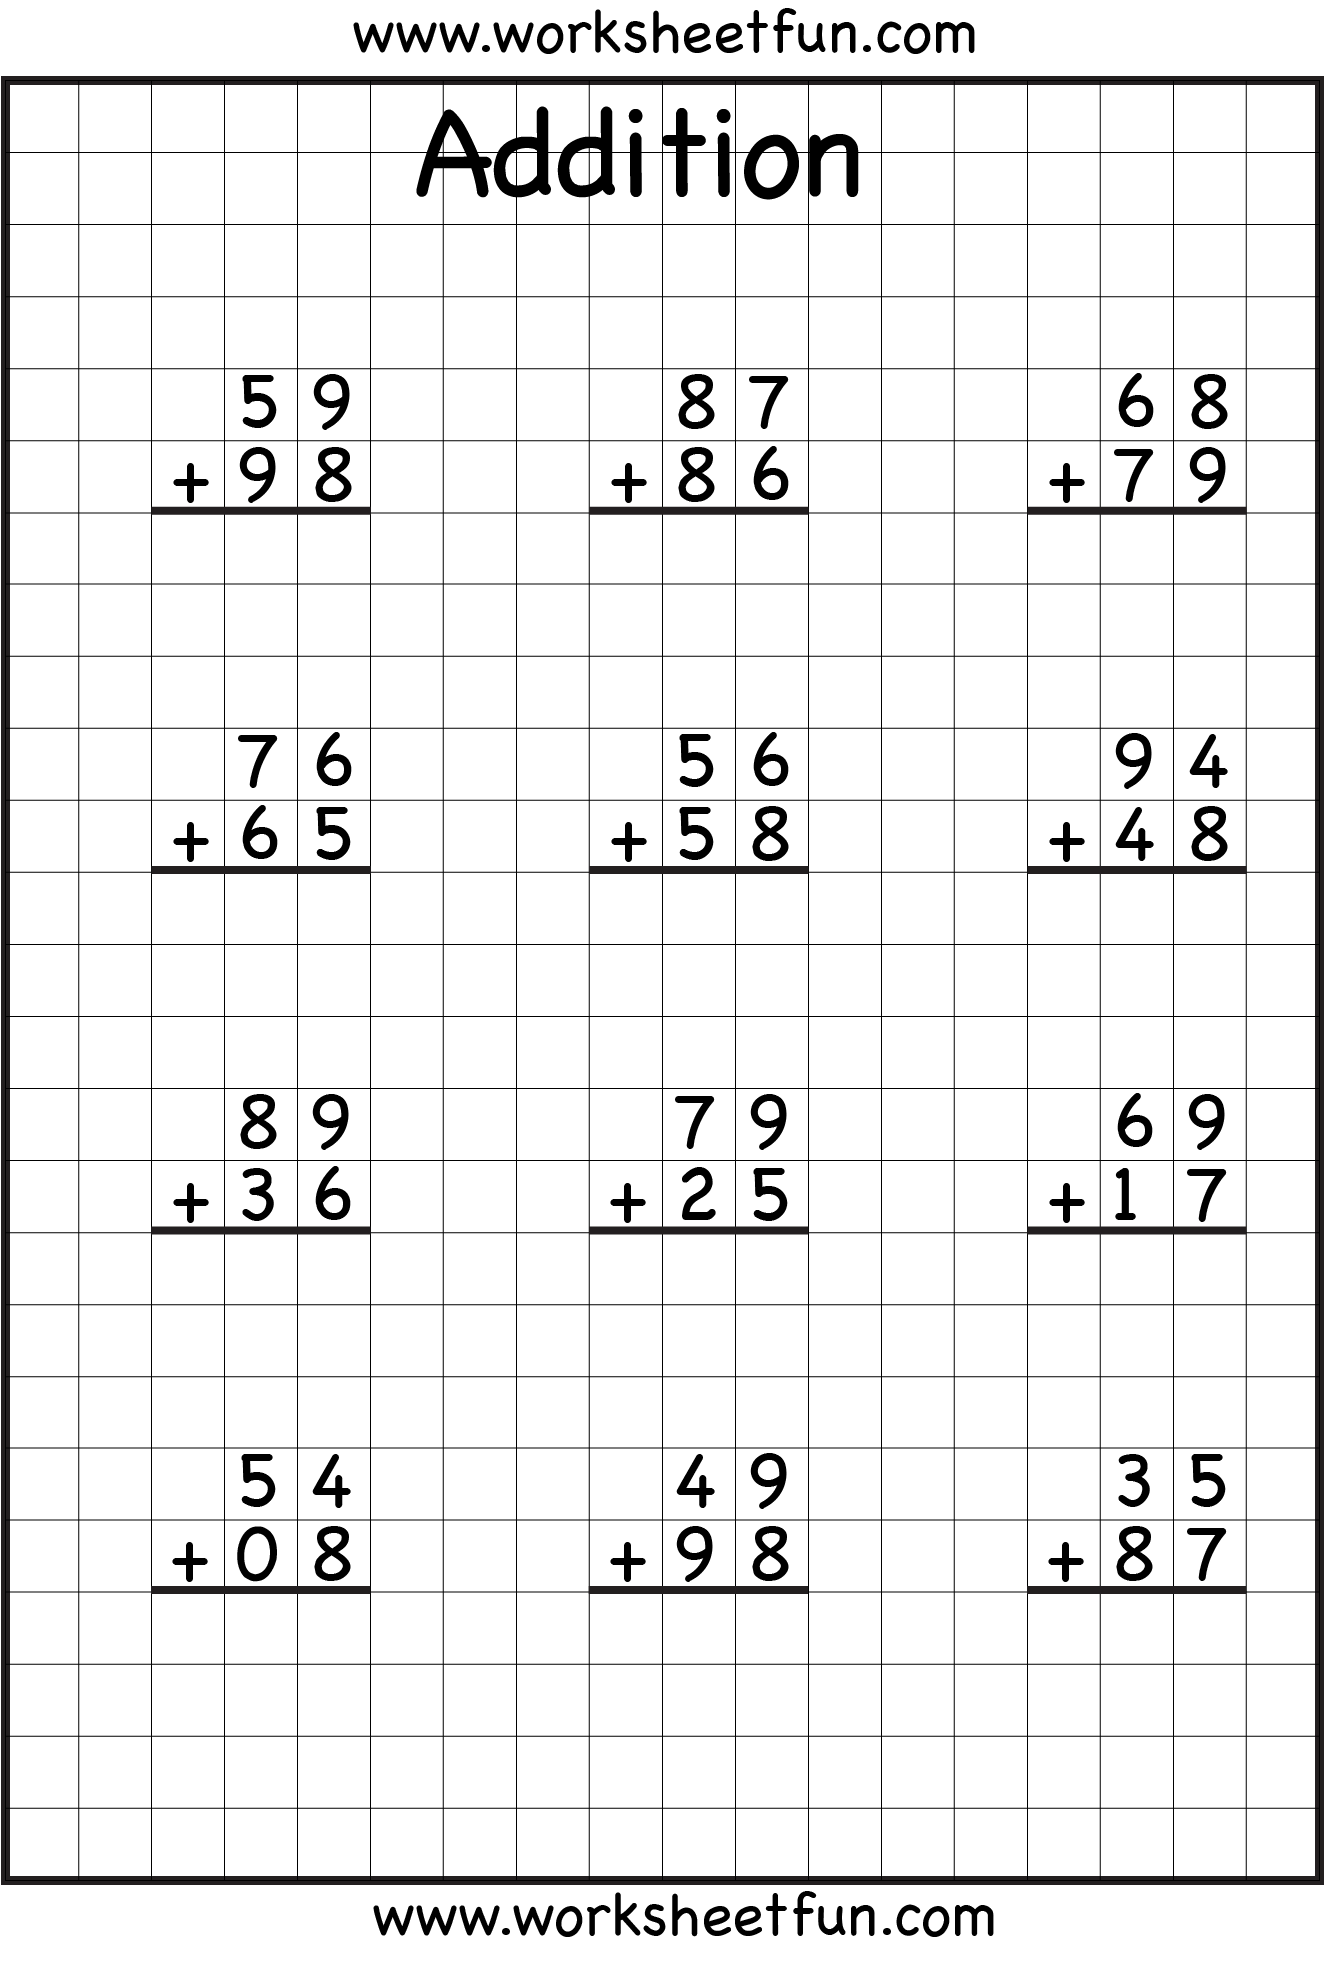 Adding Two Digit Numbers Without Regrouping Worksheets WorksheetsCity